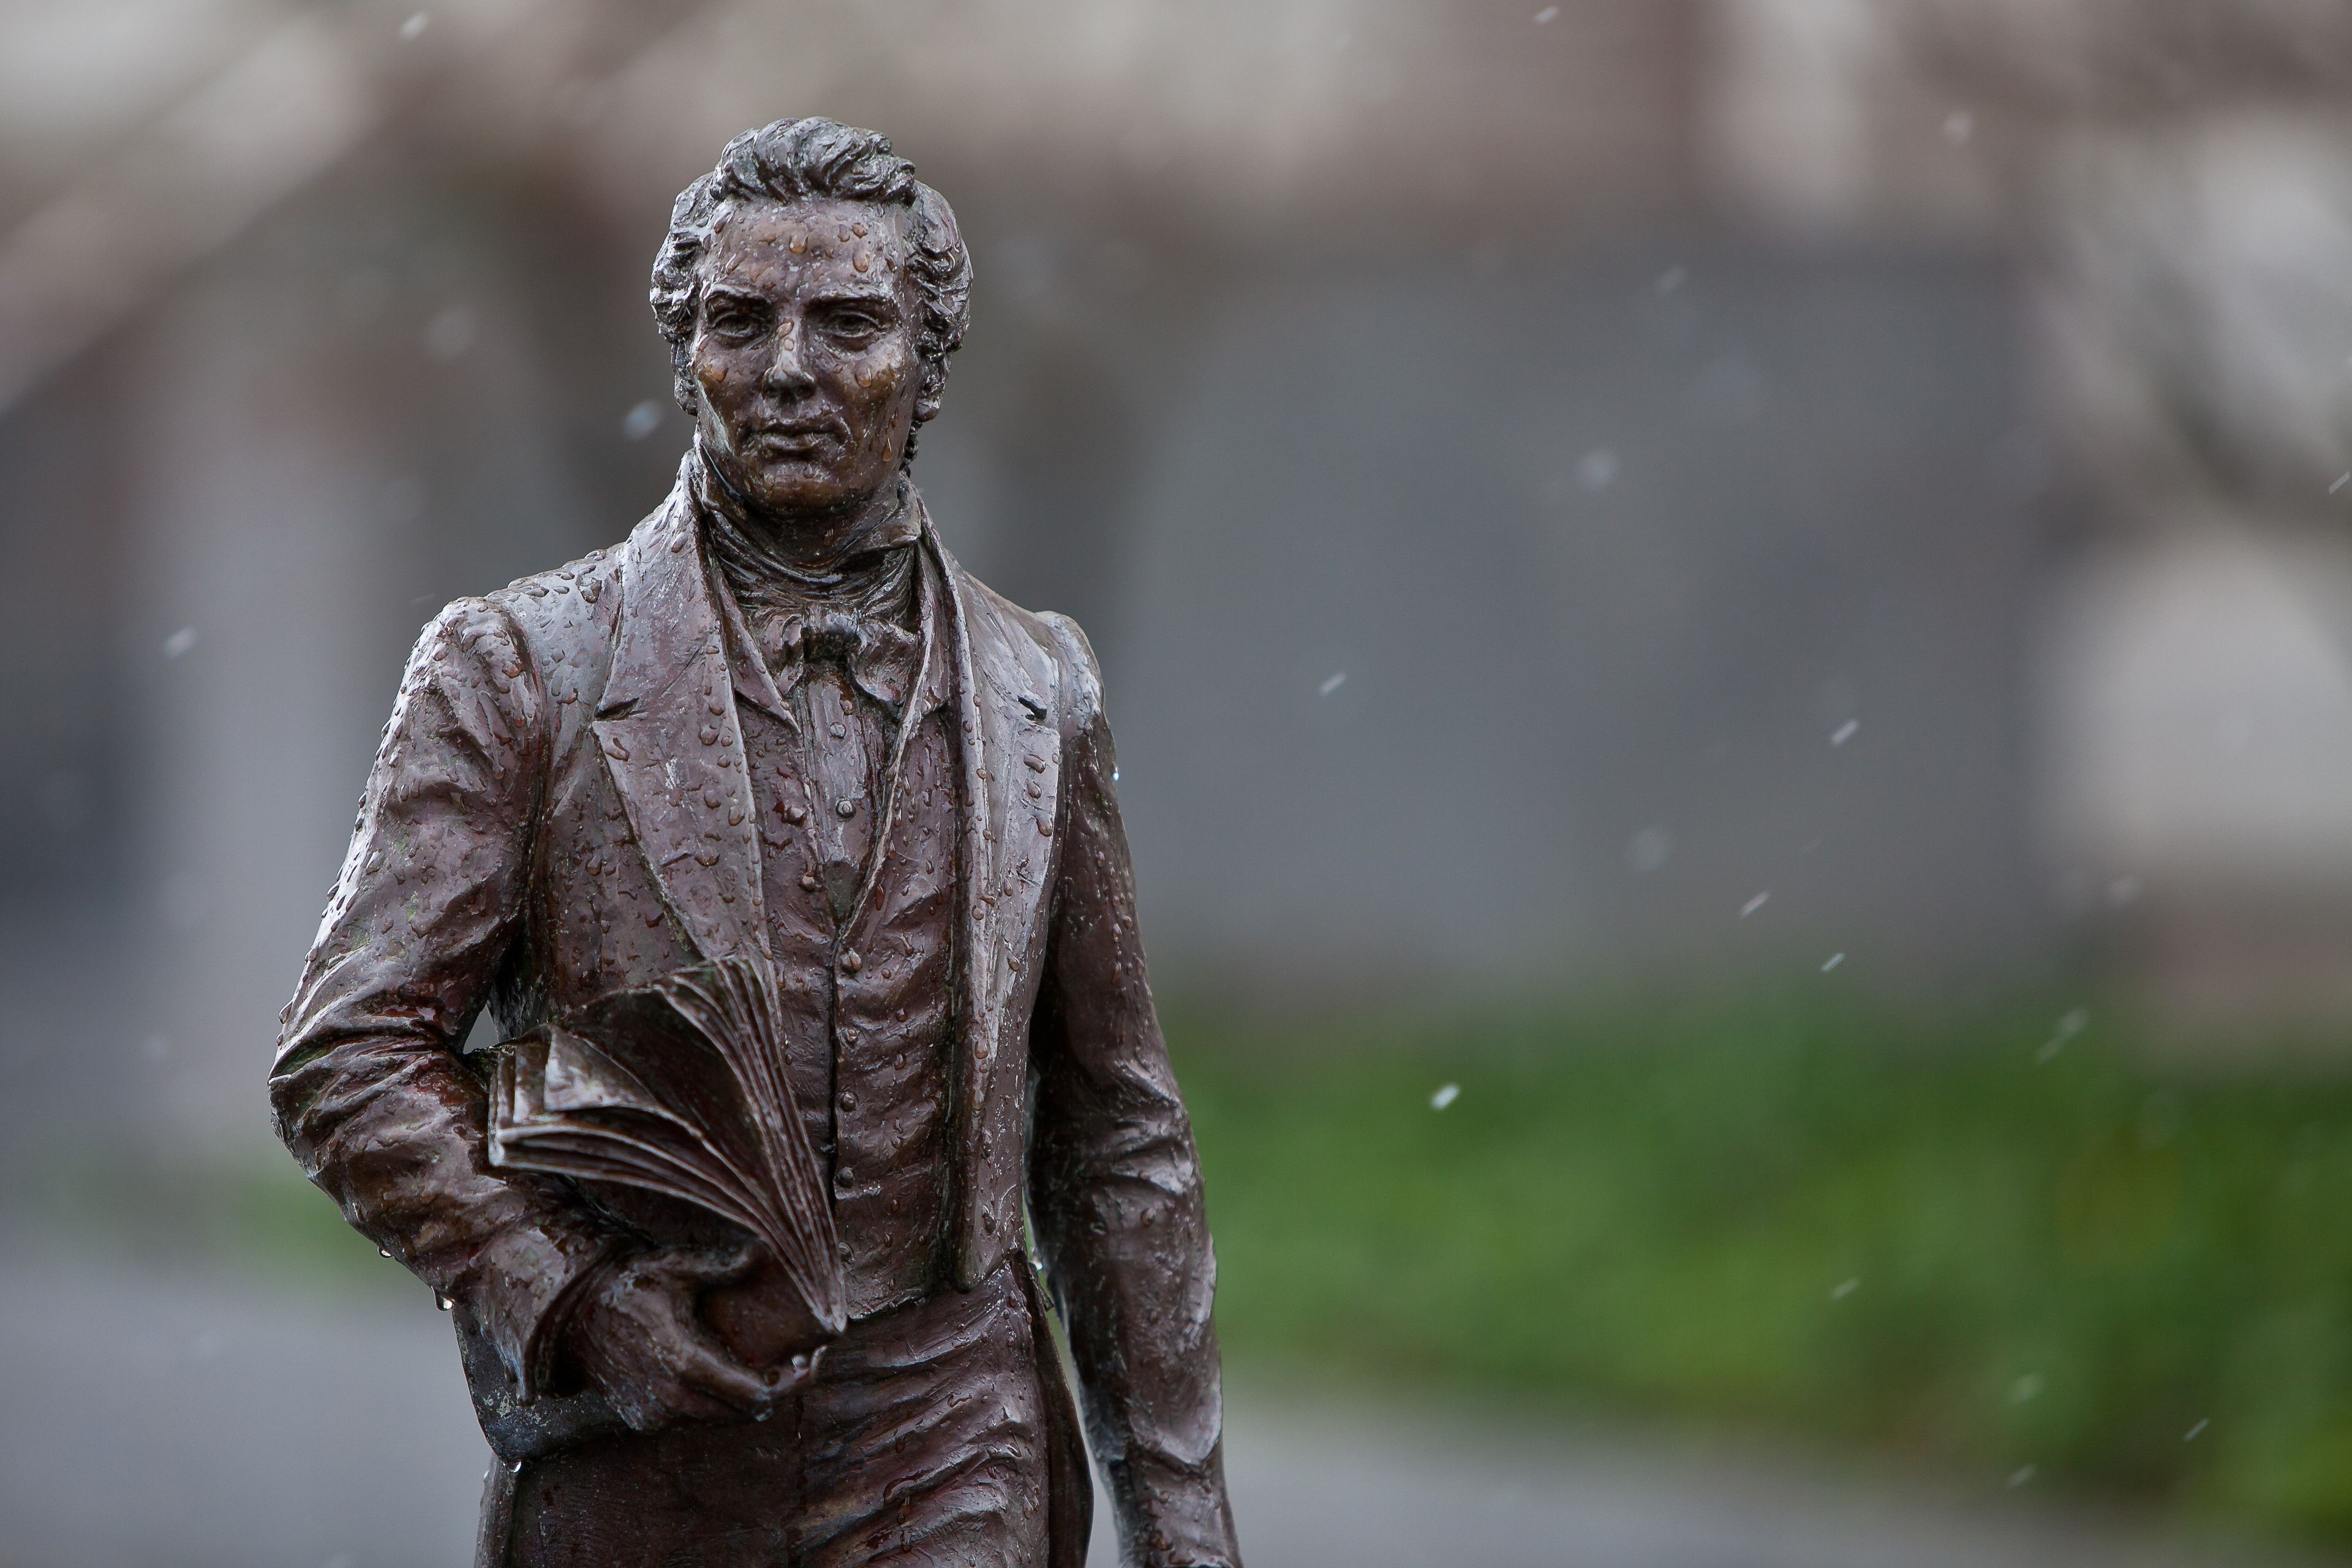 A statue of Joseph Smith found on Temple Square in Salt Lake City.  